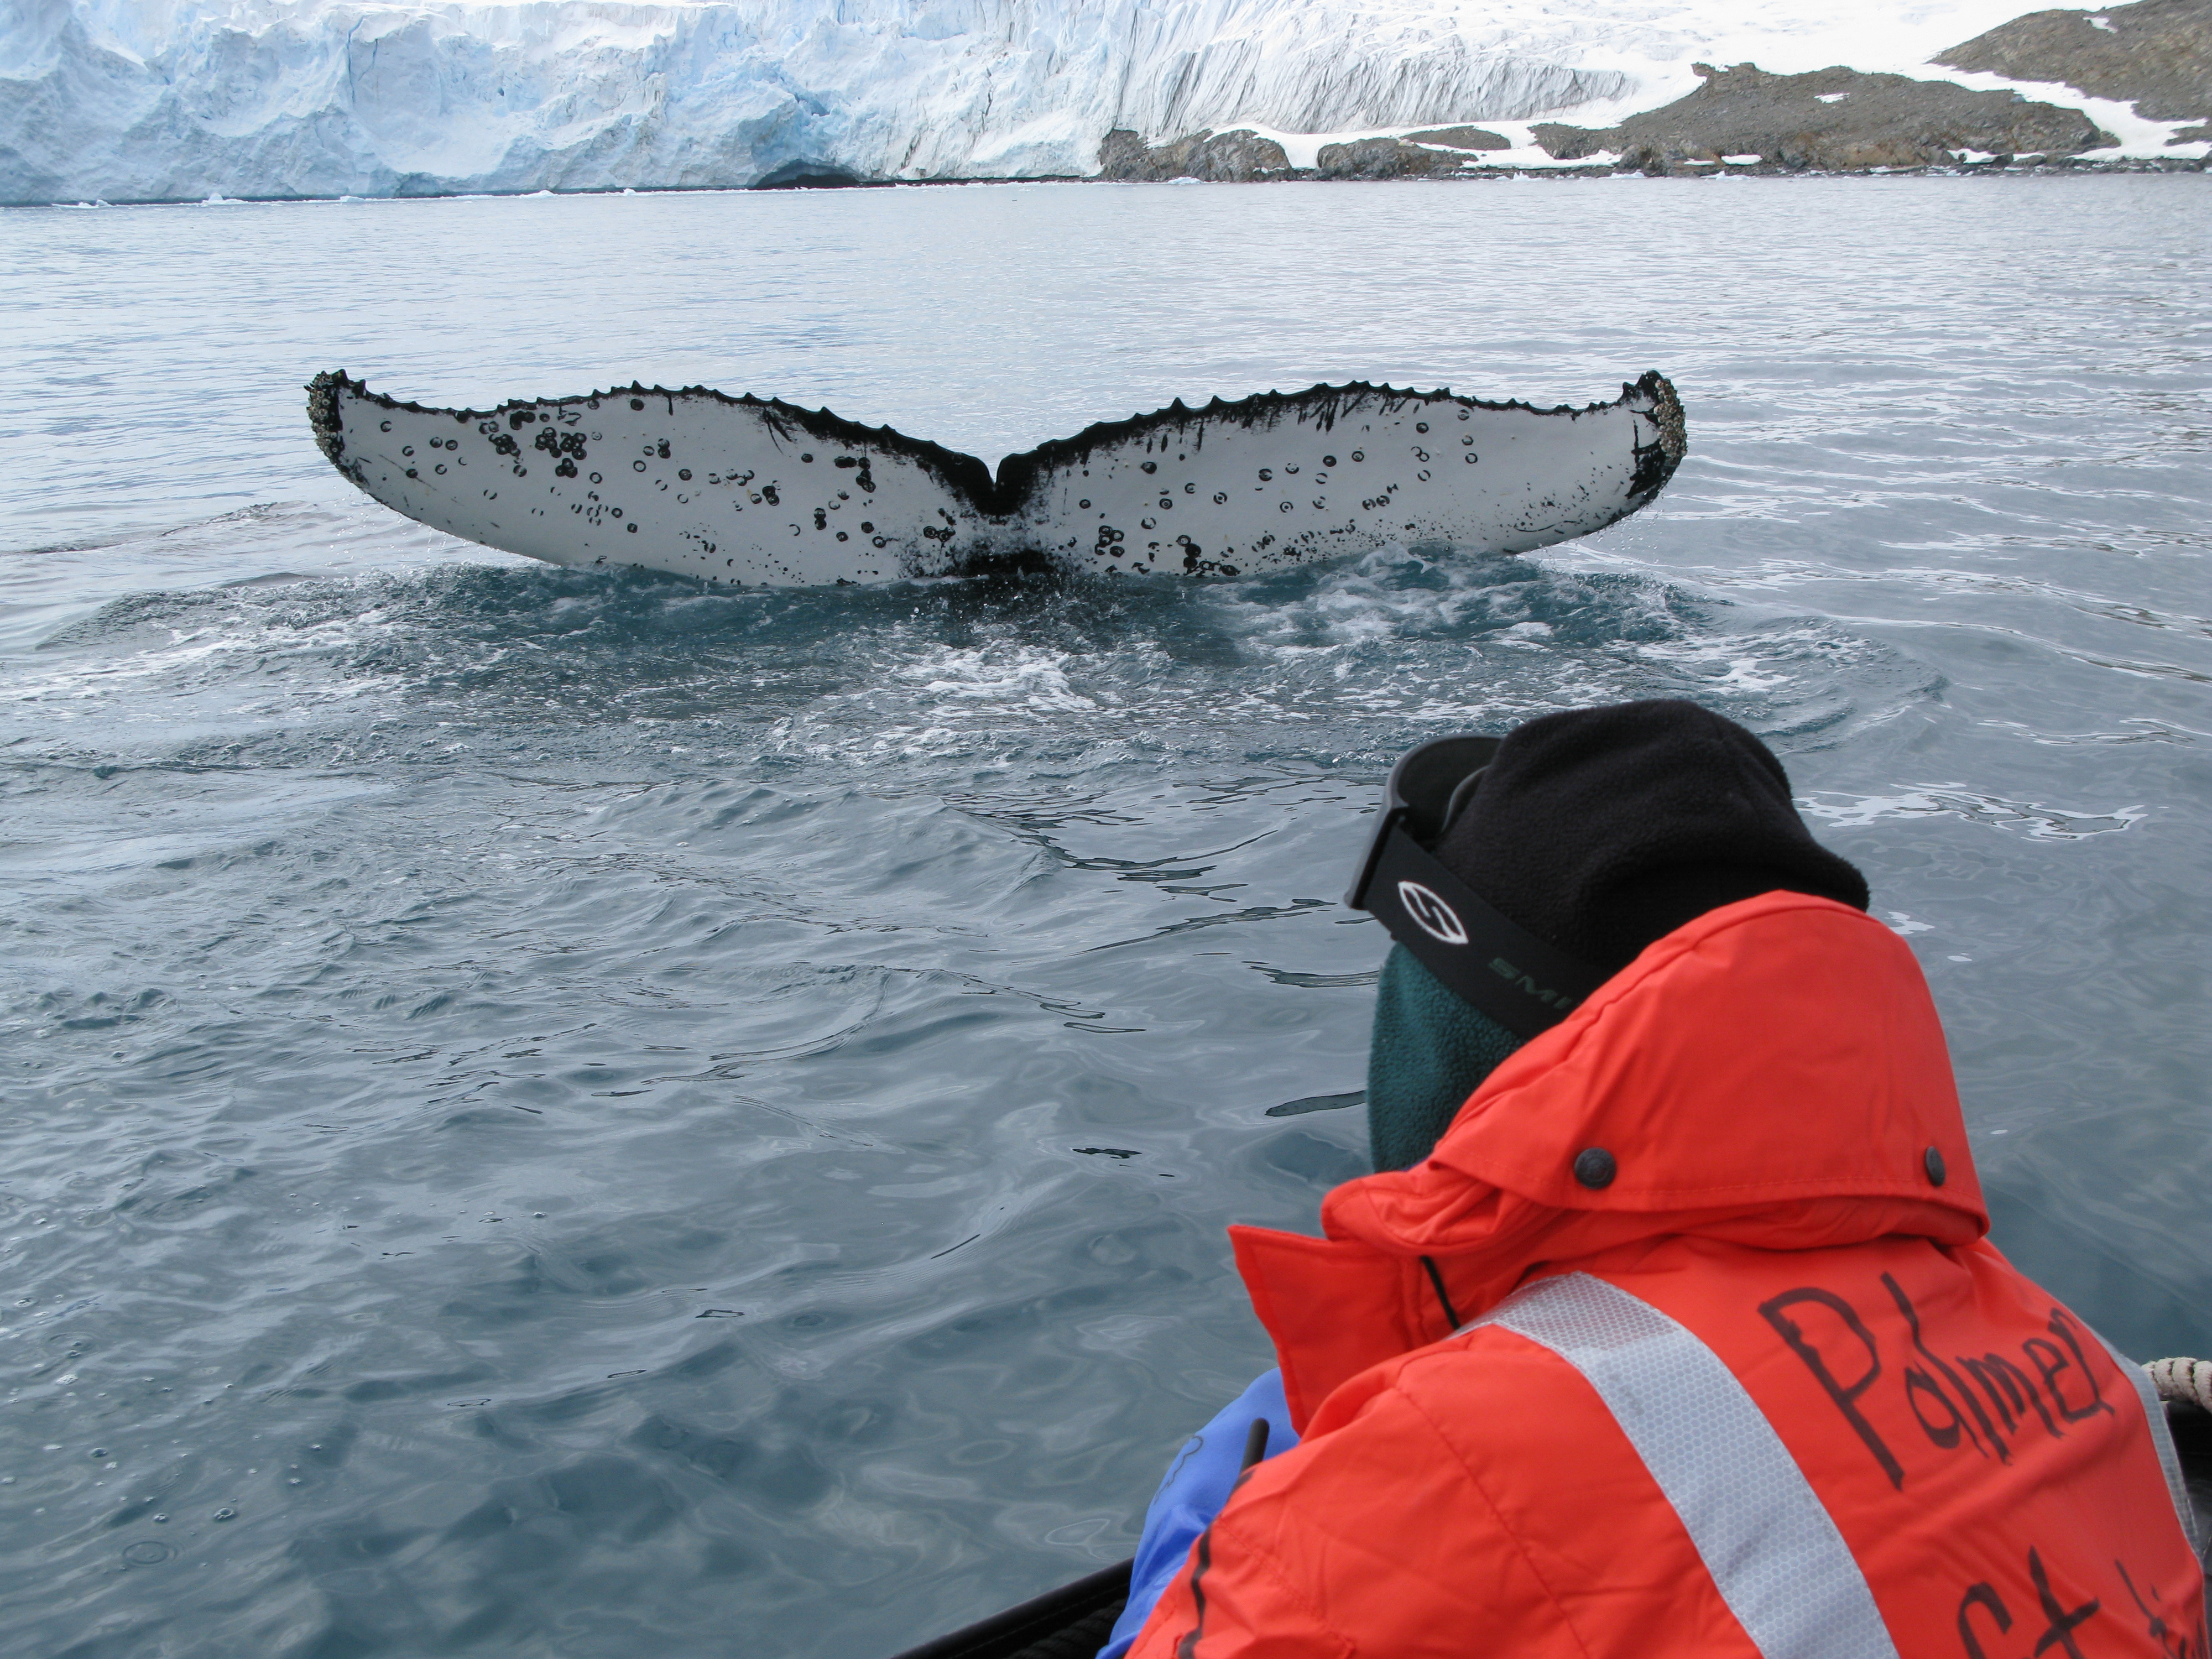 Whale tail breaks surface of the water.